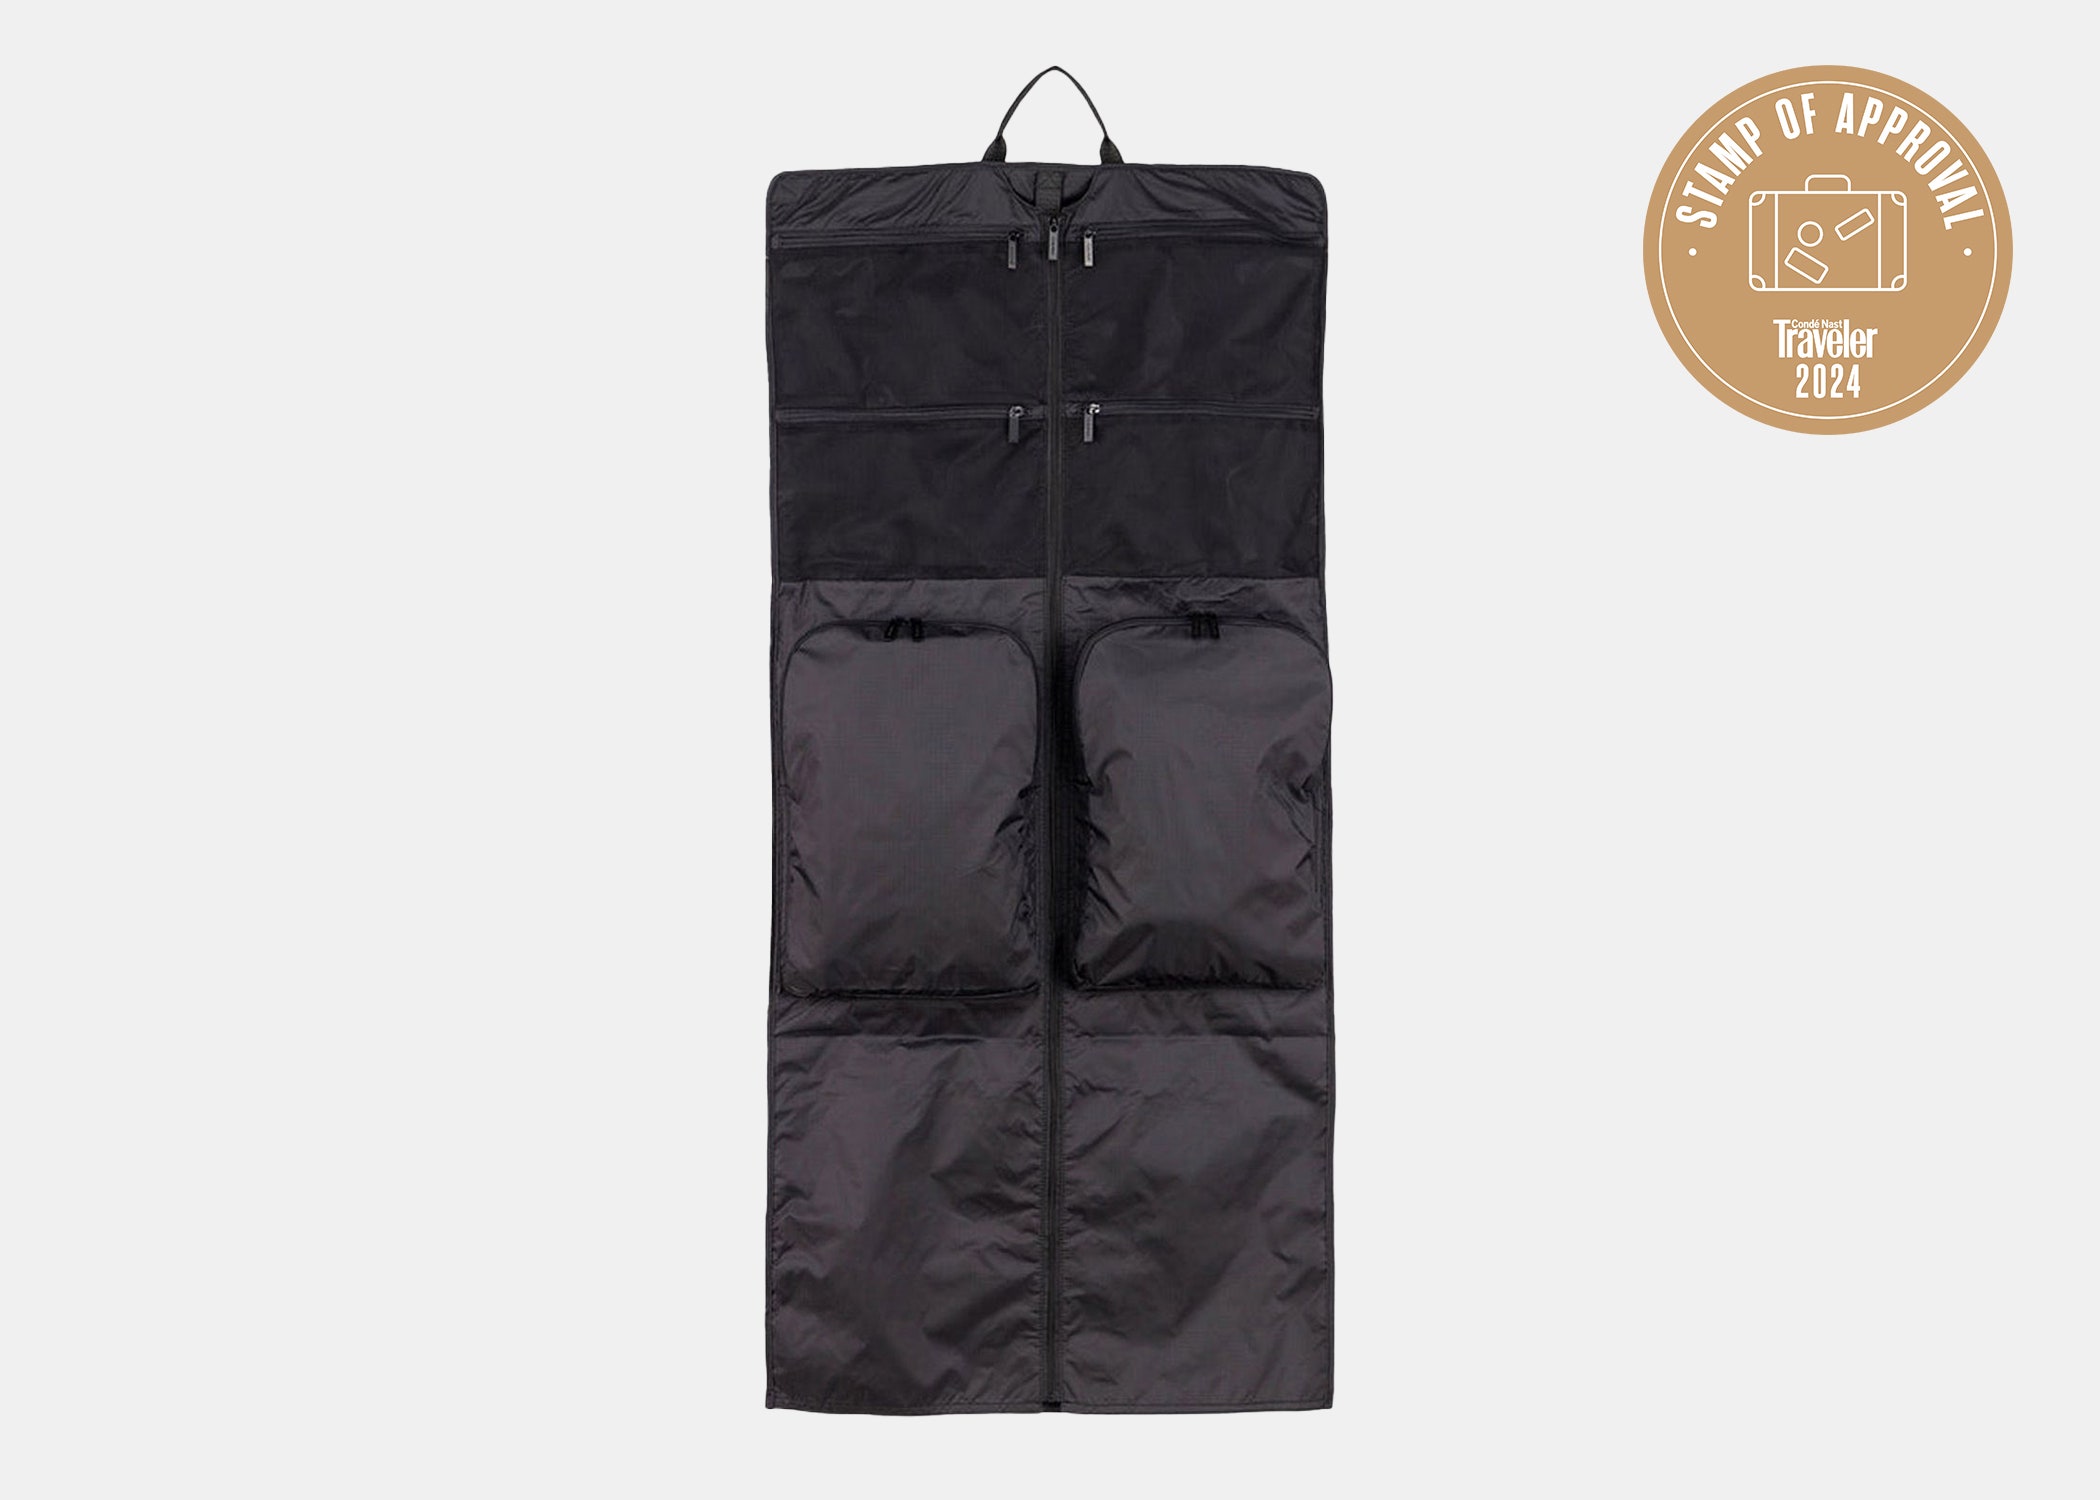 The Best Garment Bags for Travel, Tested and Reviewed